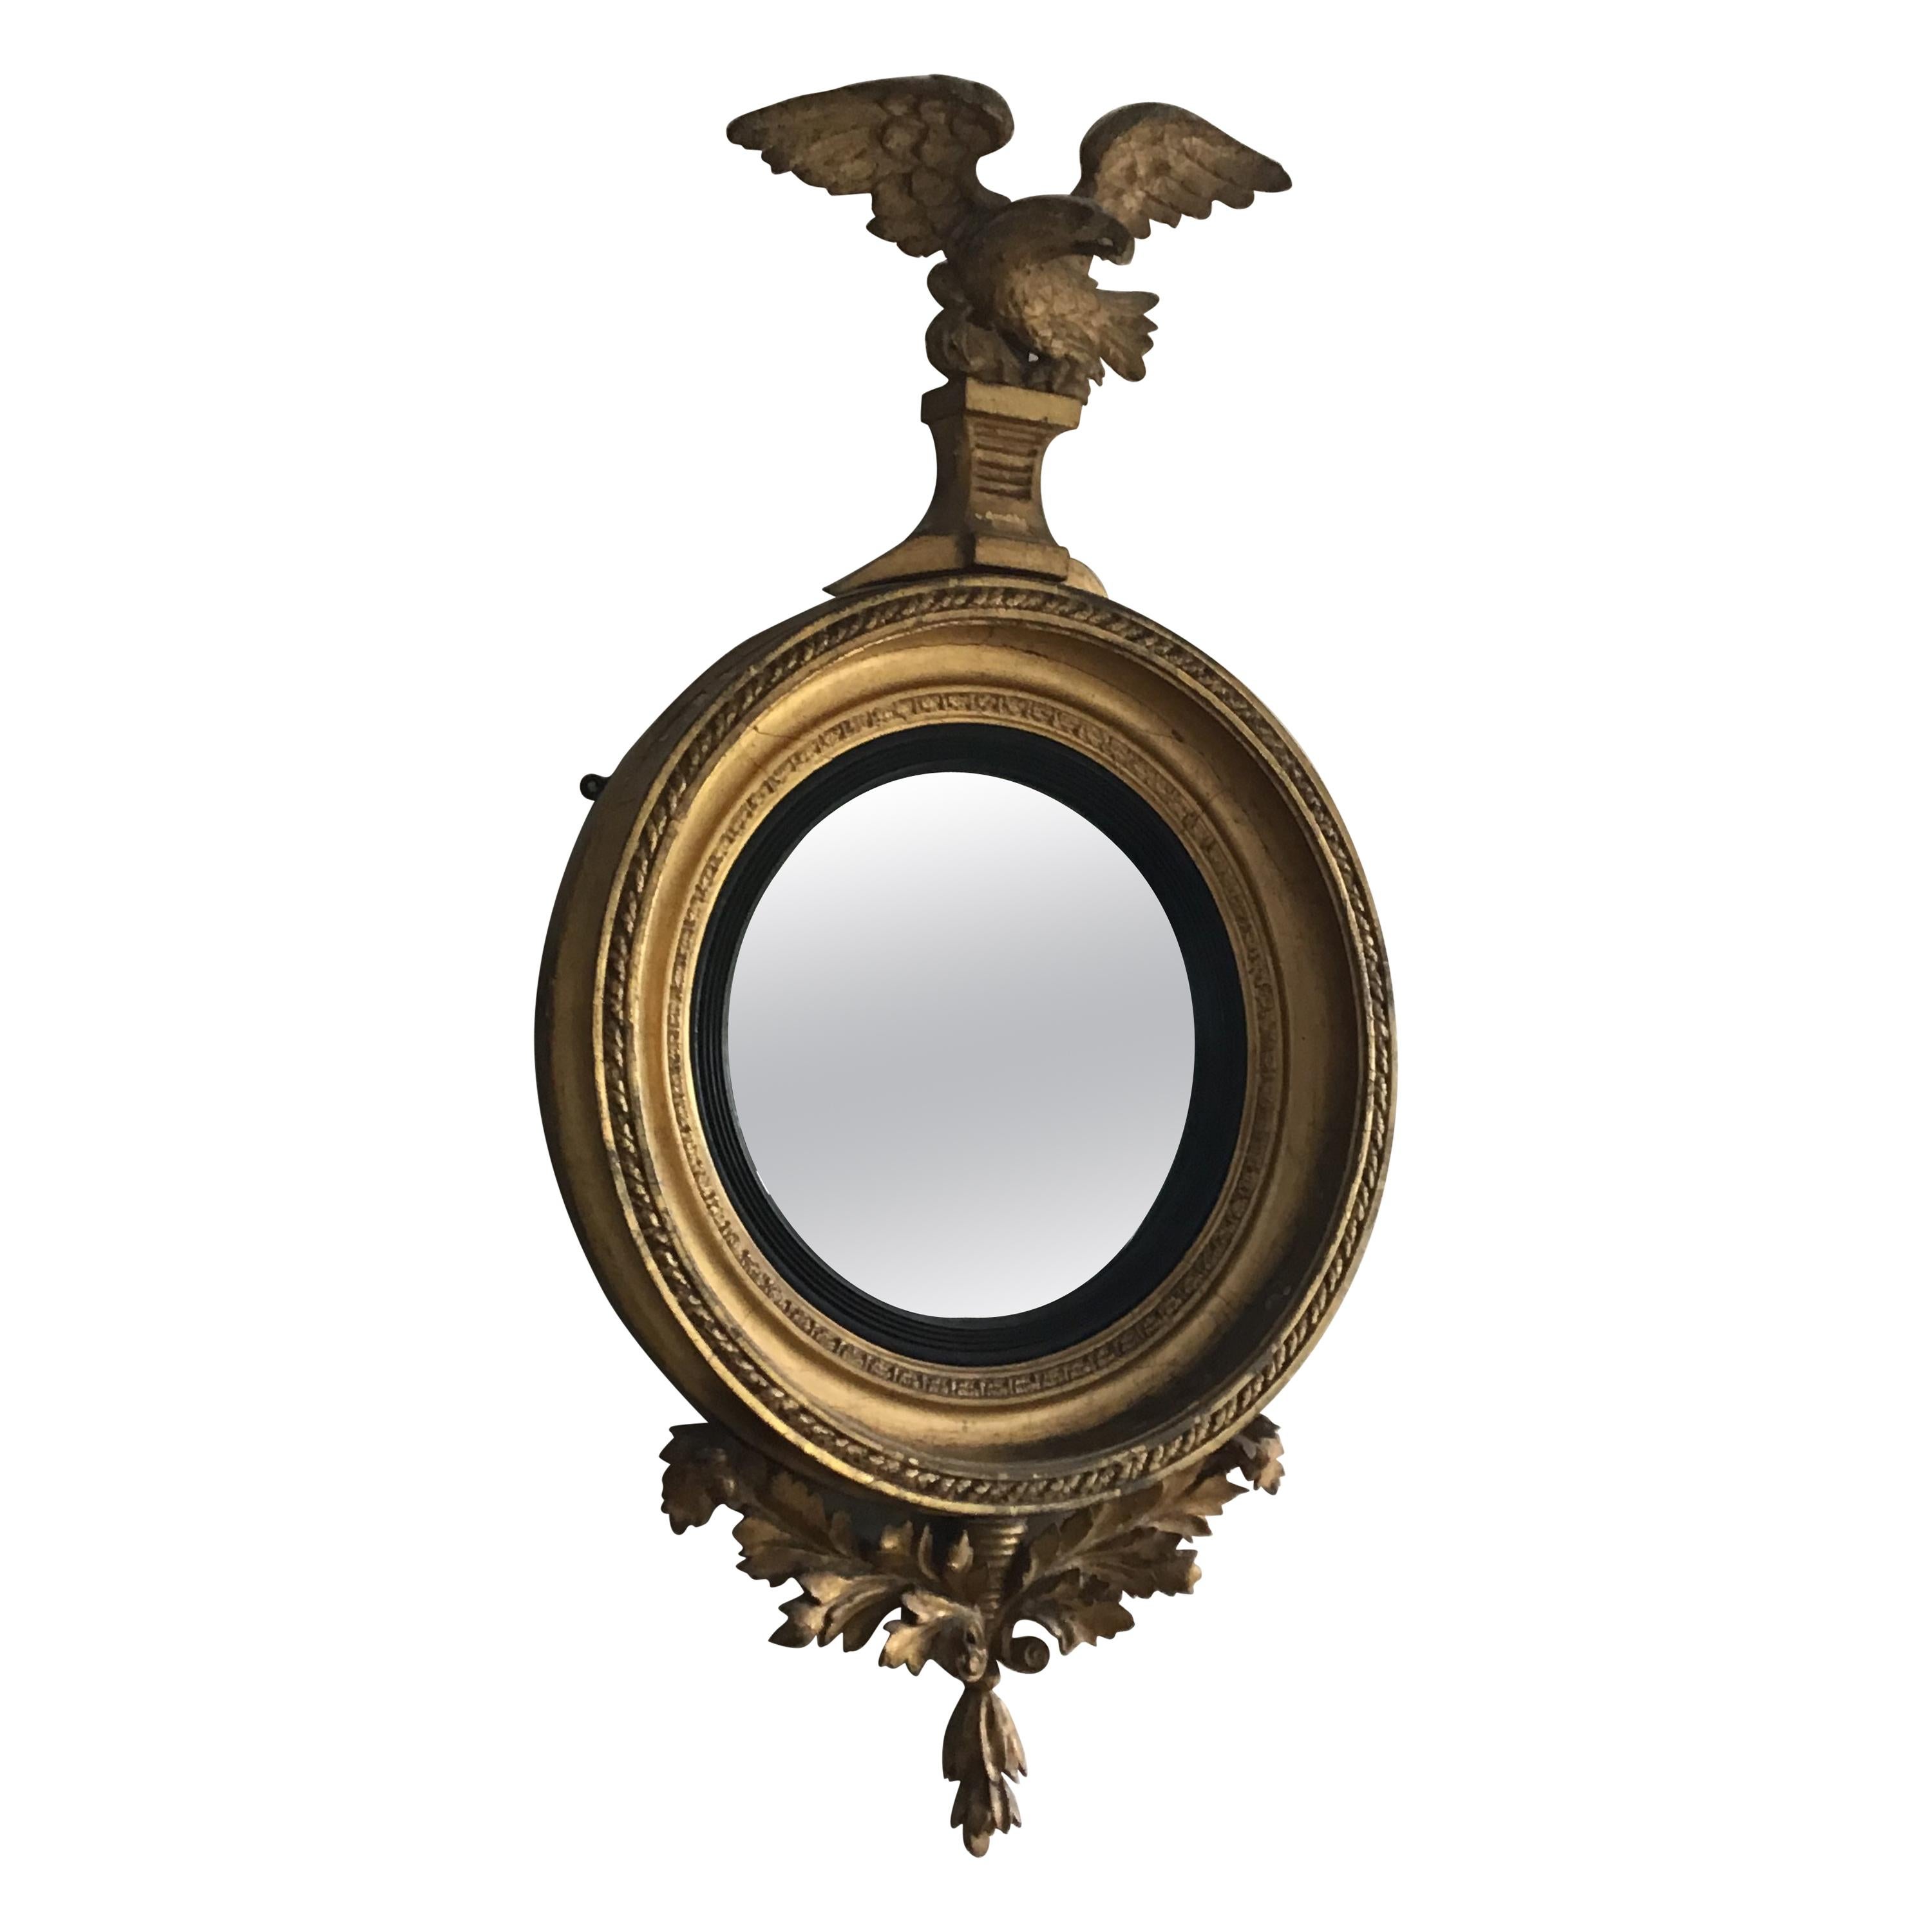 English Regency Period Giltwood Convex Wall Mirror with Eagle Crest For Sale